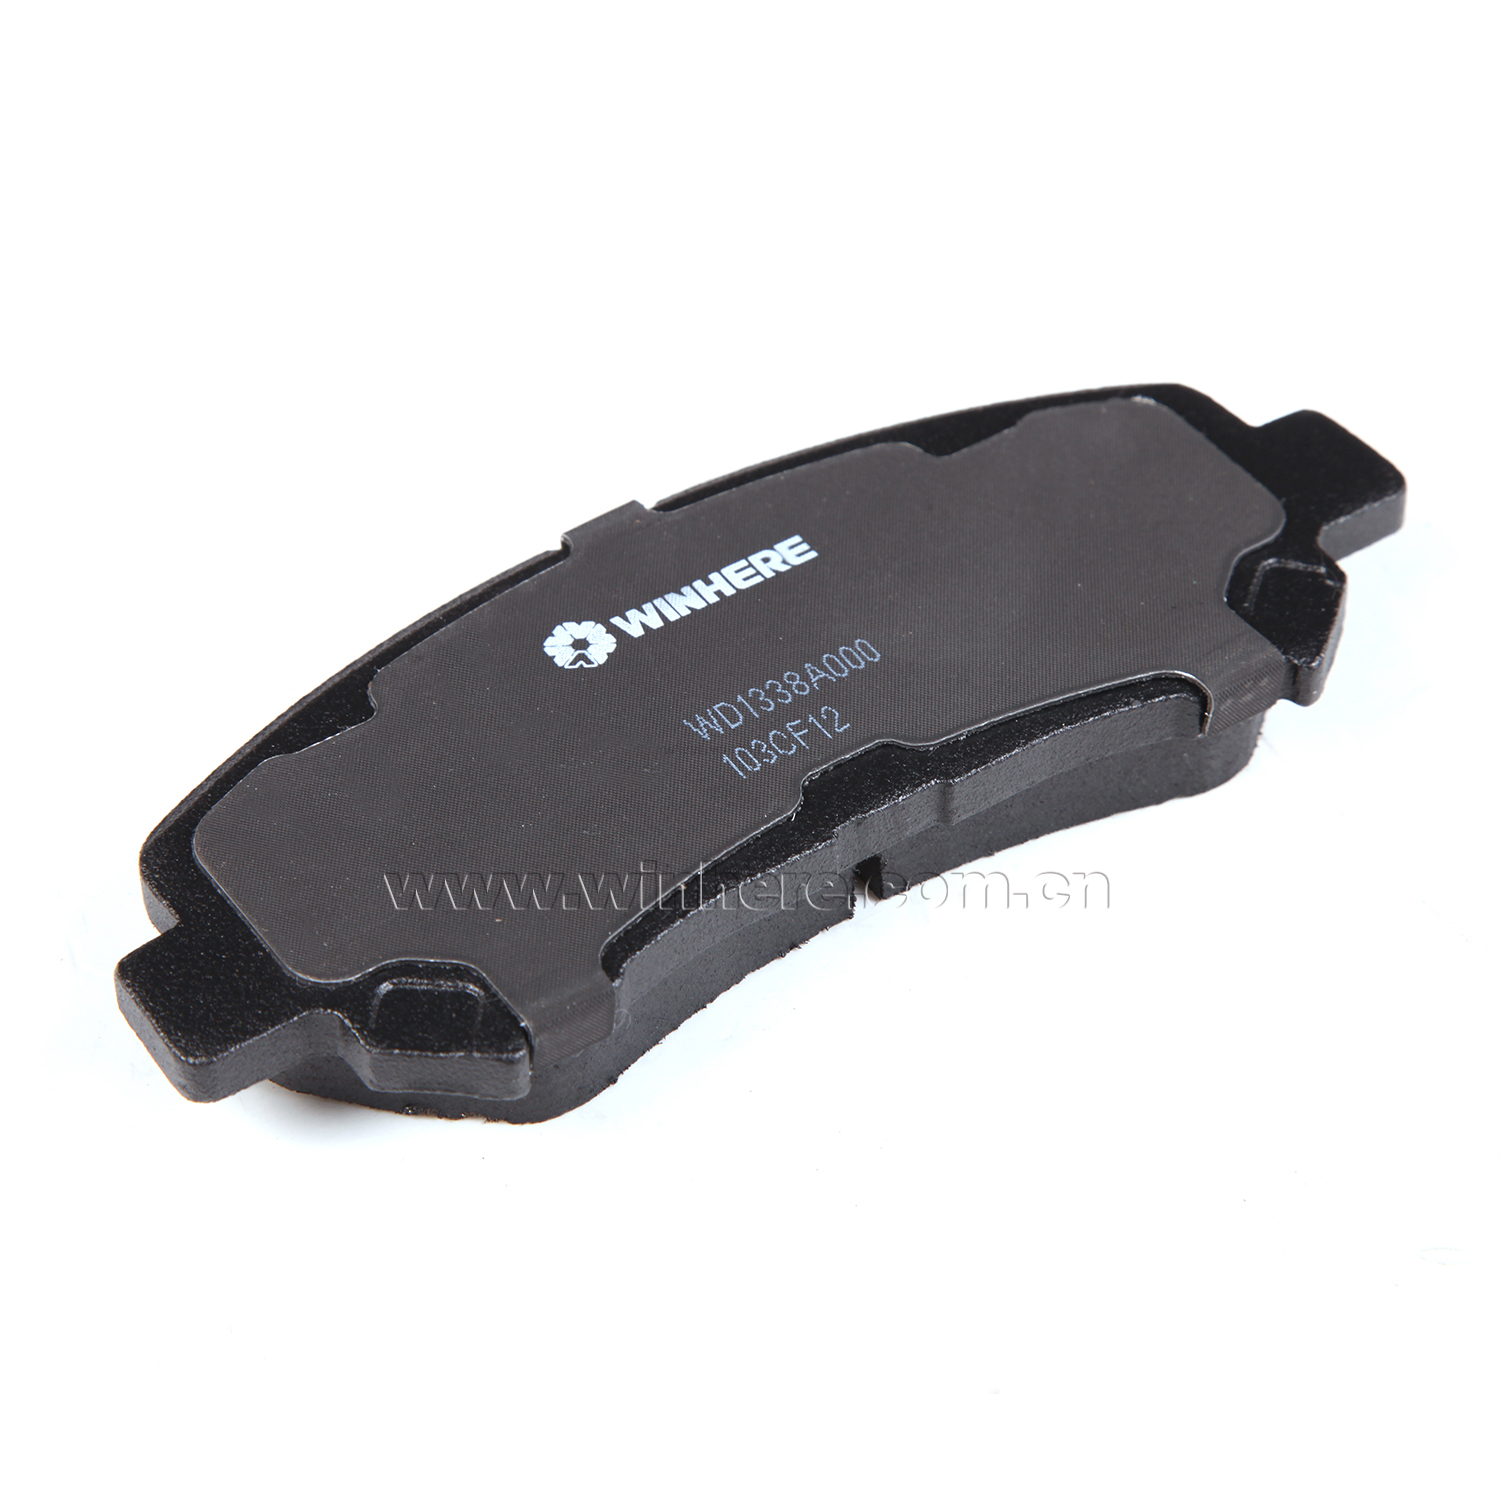 Ceramic Anti Squeal Brake Pad for NISSAN Front ECE R90